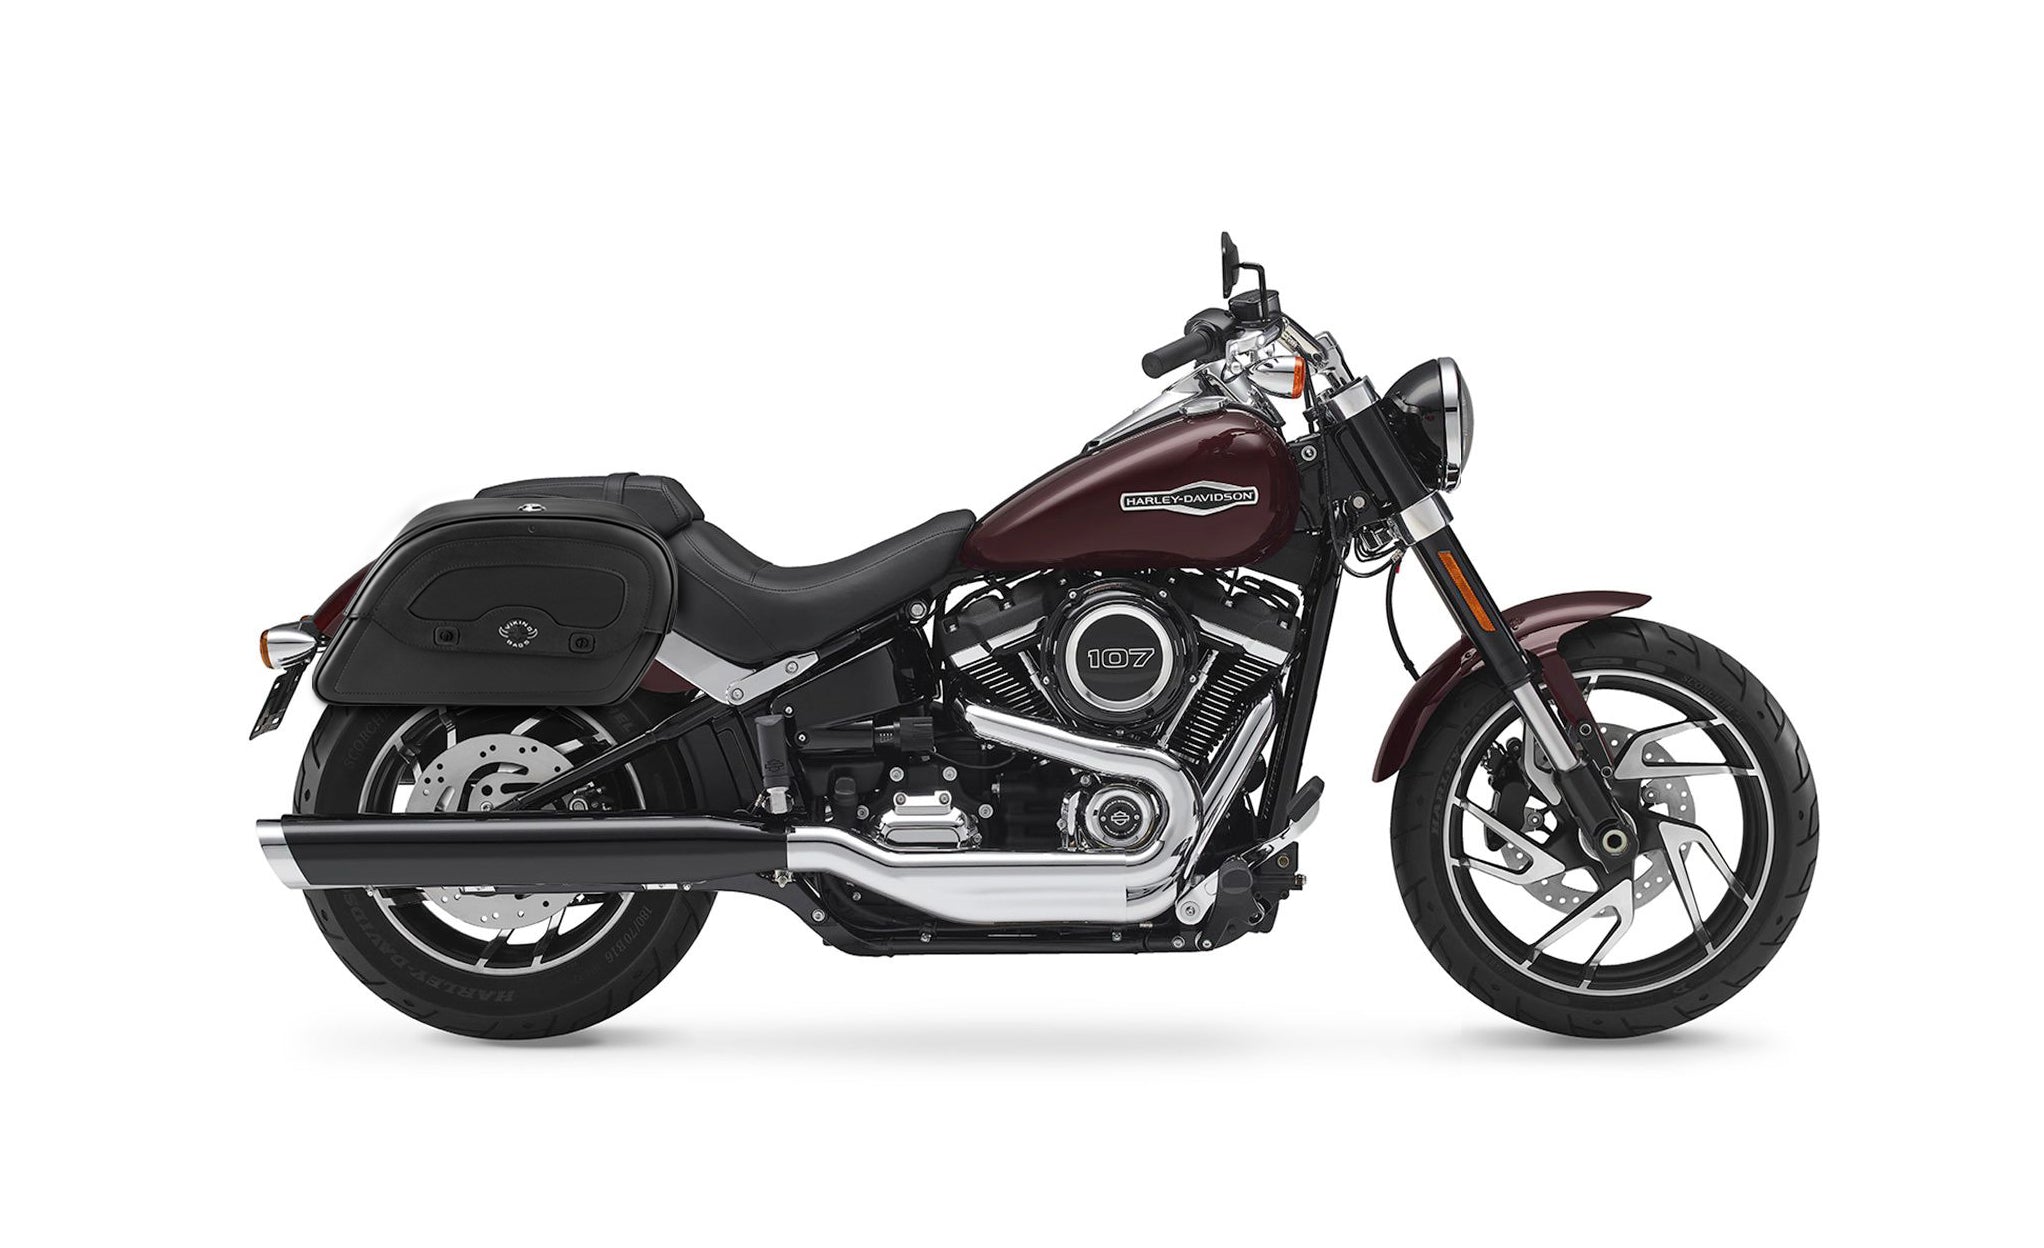 22L - Warrior Medium Quick-Mount Motorcycle Saddlebags For Harley Softail Sport Glide @expand